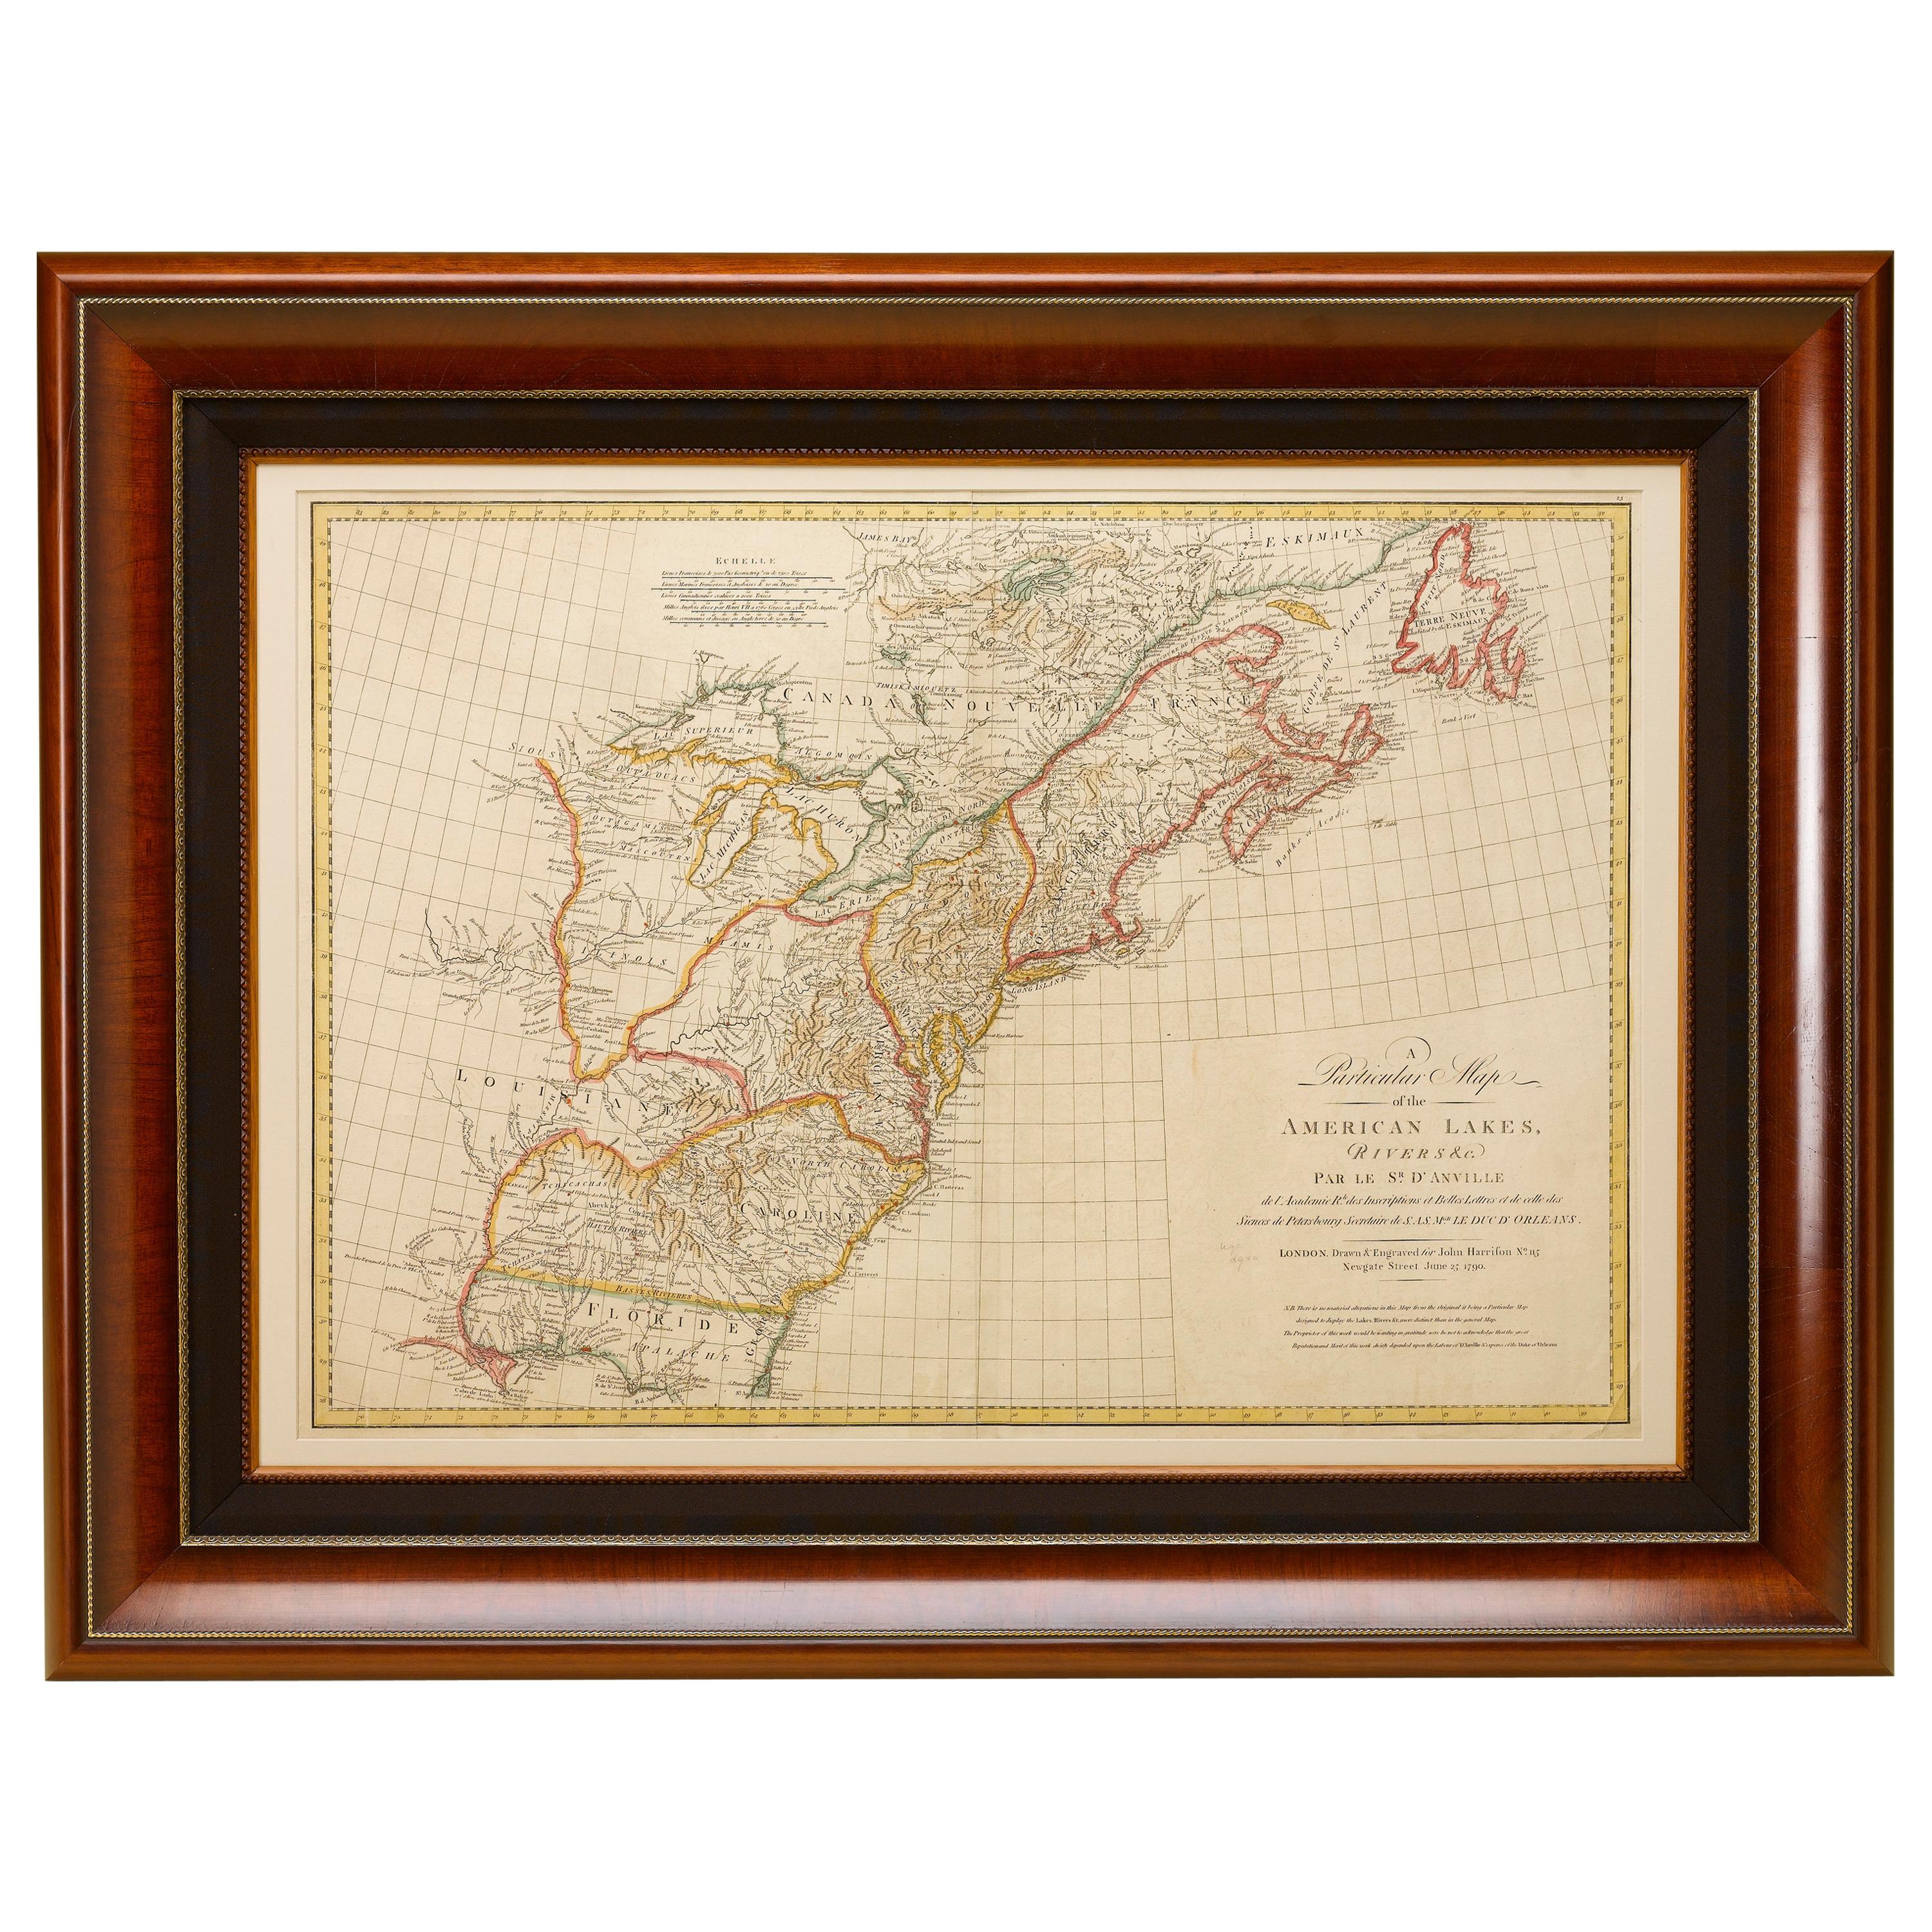 Antique Map of North America, Depicting the New World's Lakes and Rivers, 1790